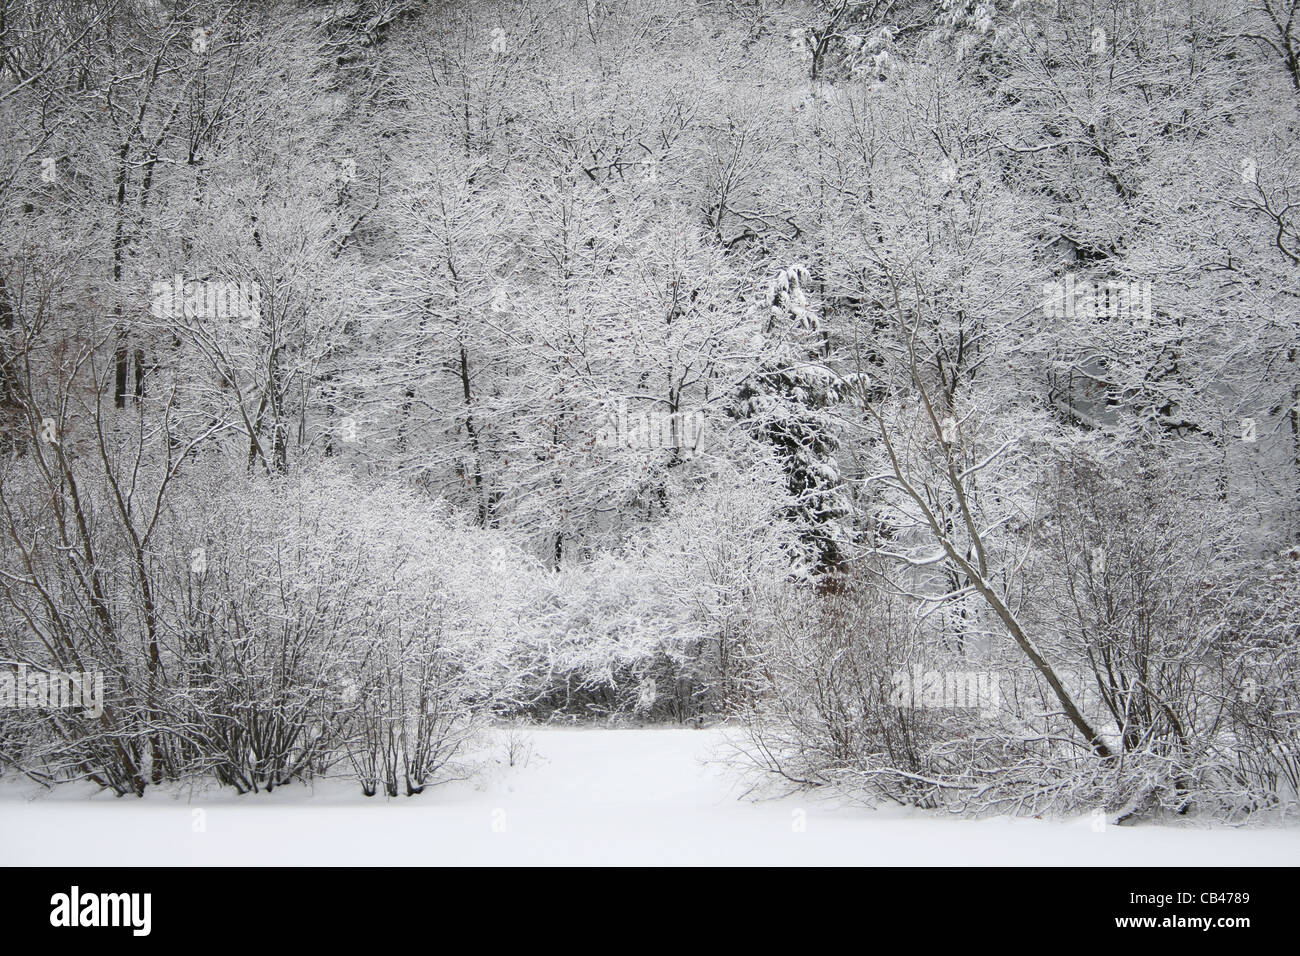 evergreen and deciduous trees and bushes with snow on the branches and ground. High contrast image. Stock Photo